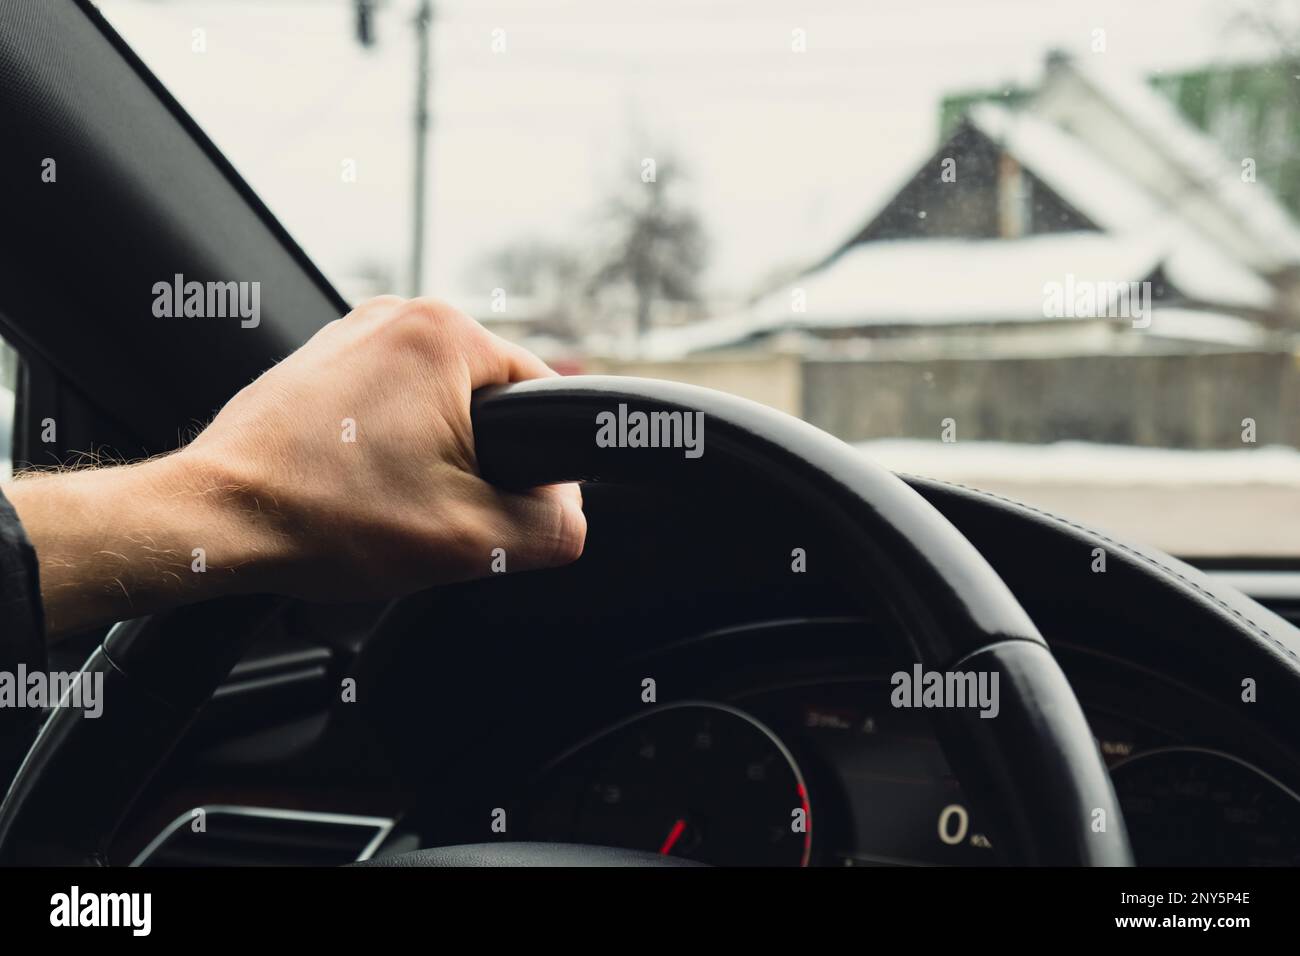 Shift paddles. Steering wheel with shift paddles. Manual gear changing stick  on a car's steering wheel Stock Photo - Alamy